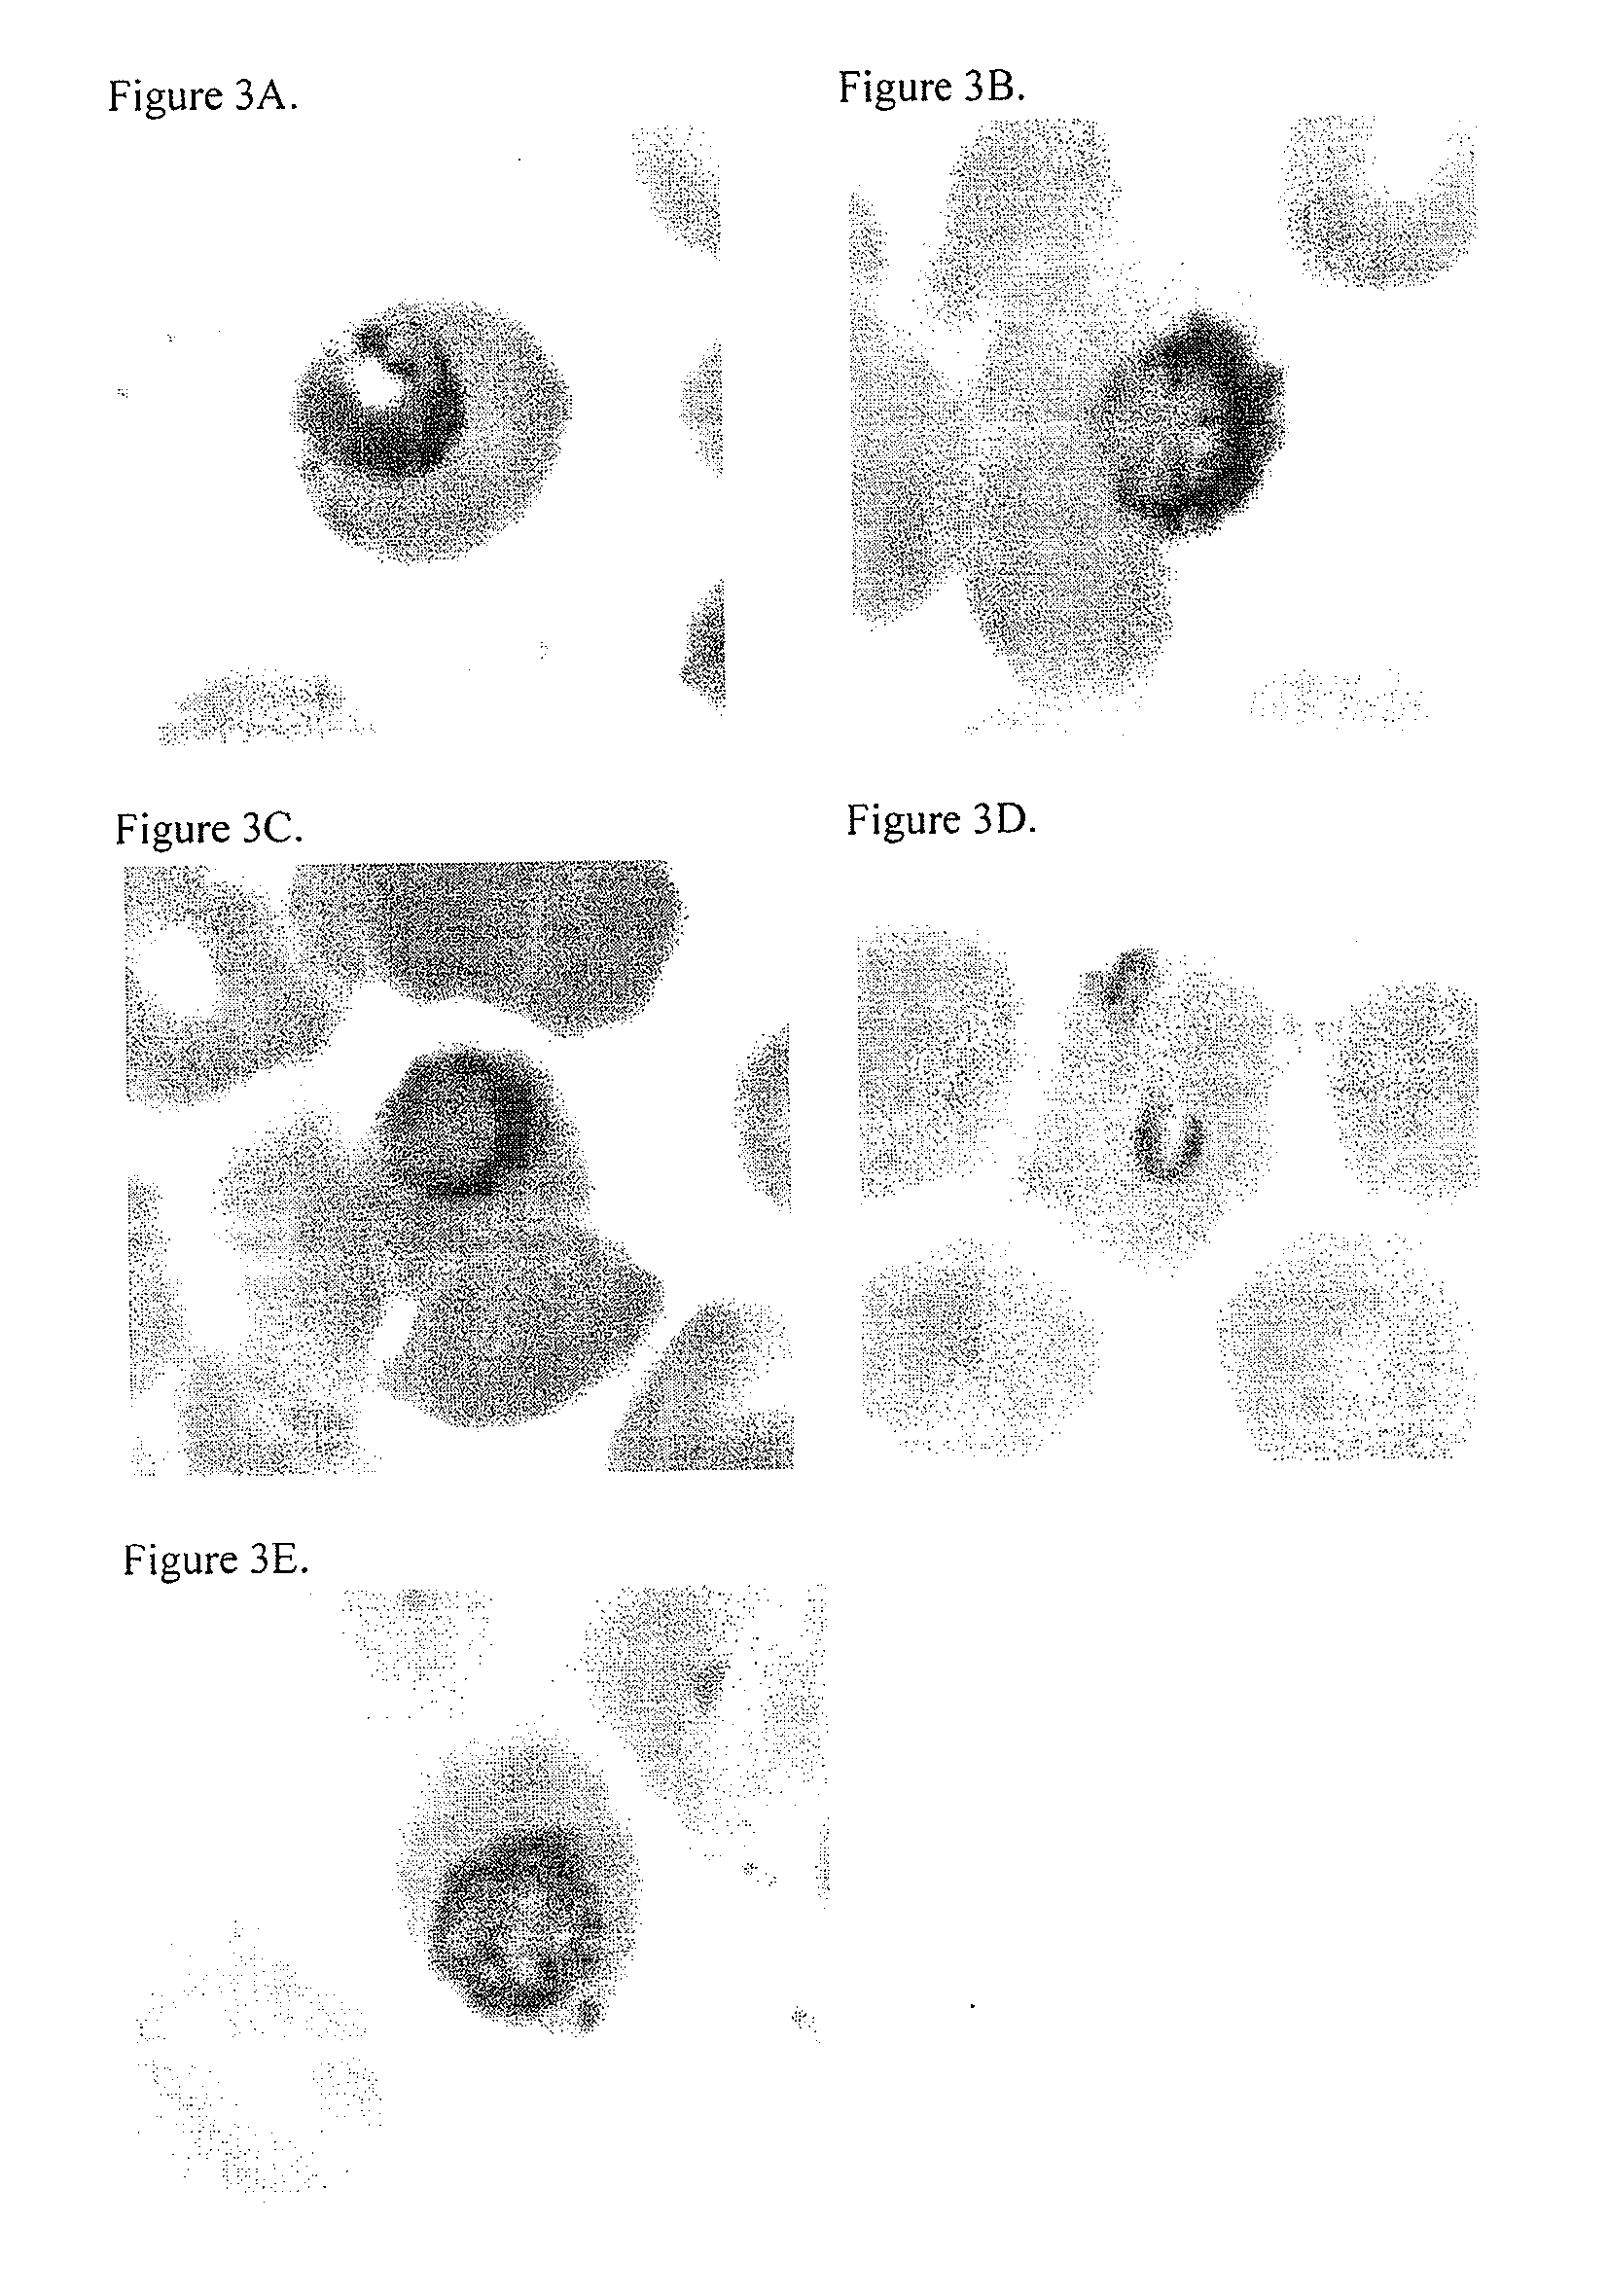 Prodrug and Fluoregenic Compositions and Methods for Using the Same